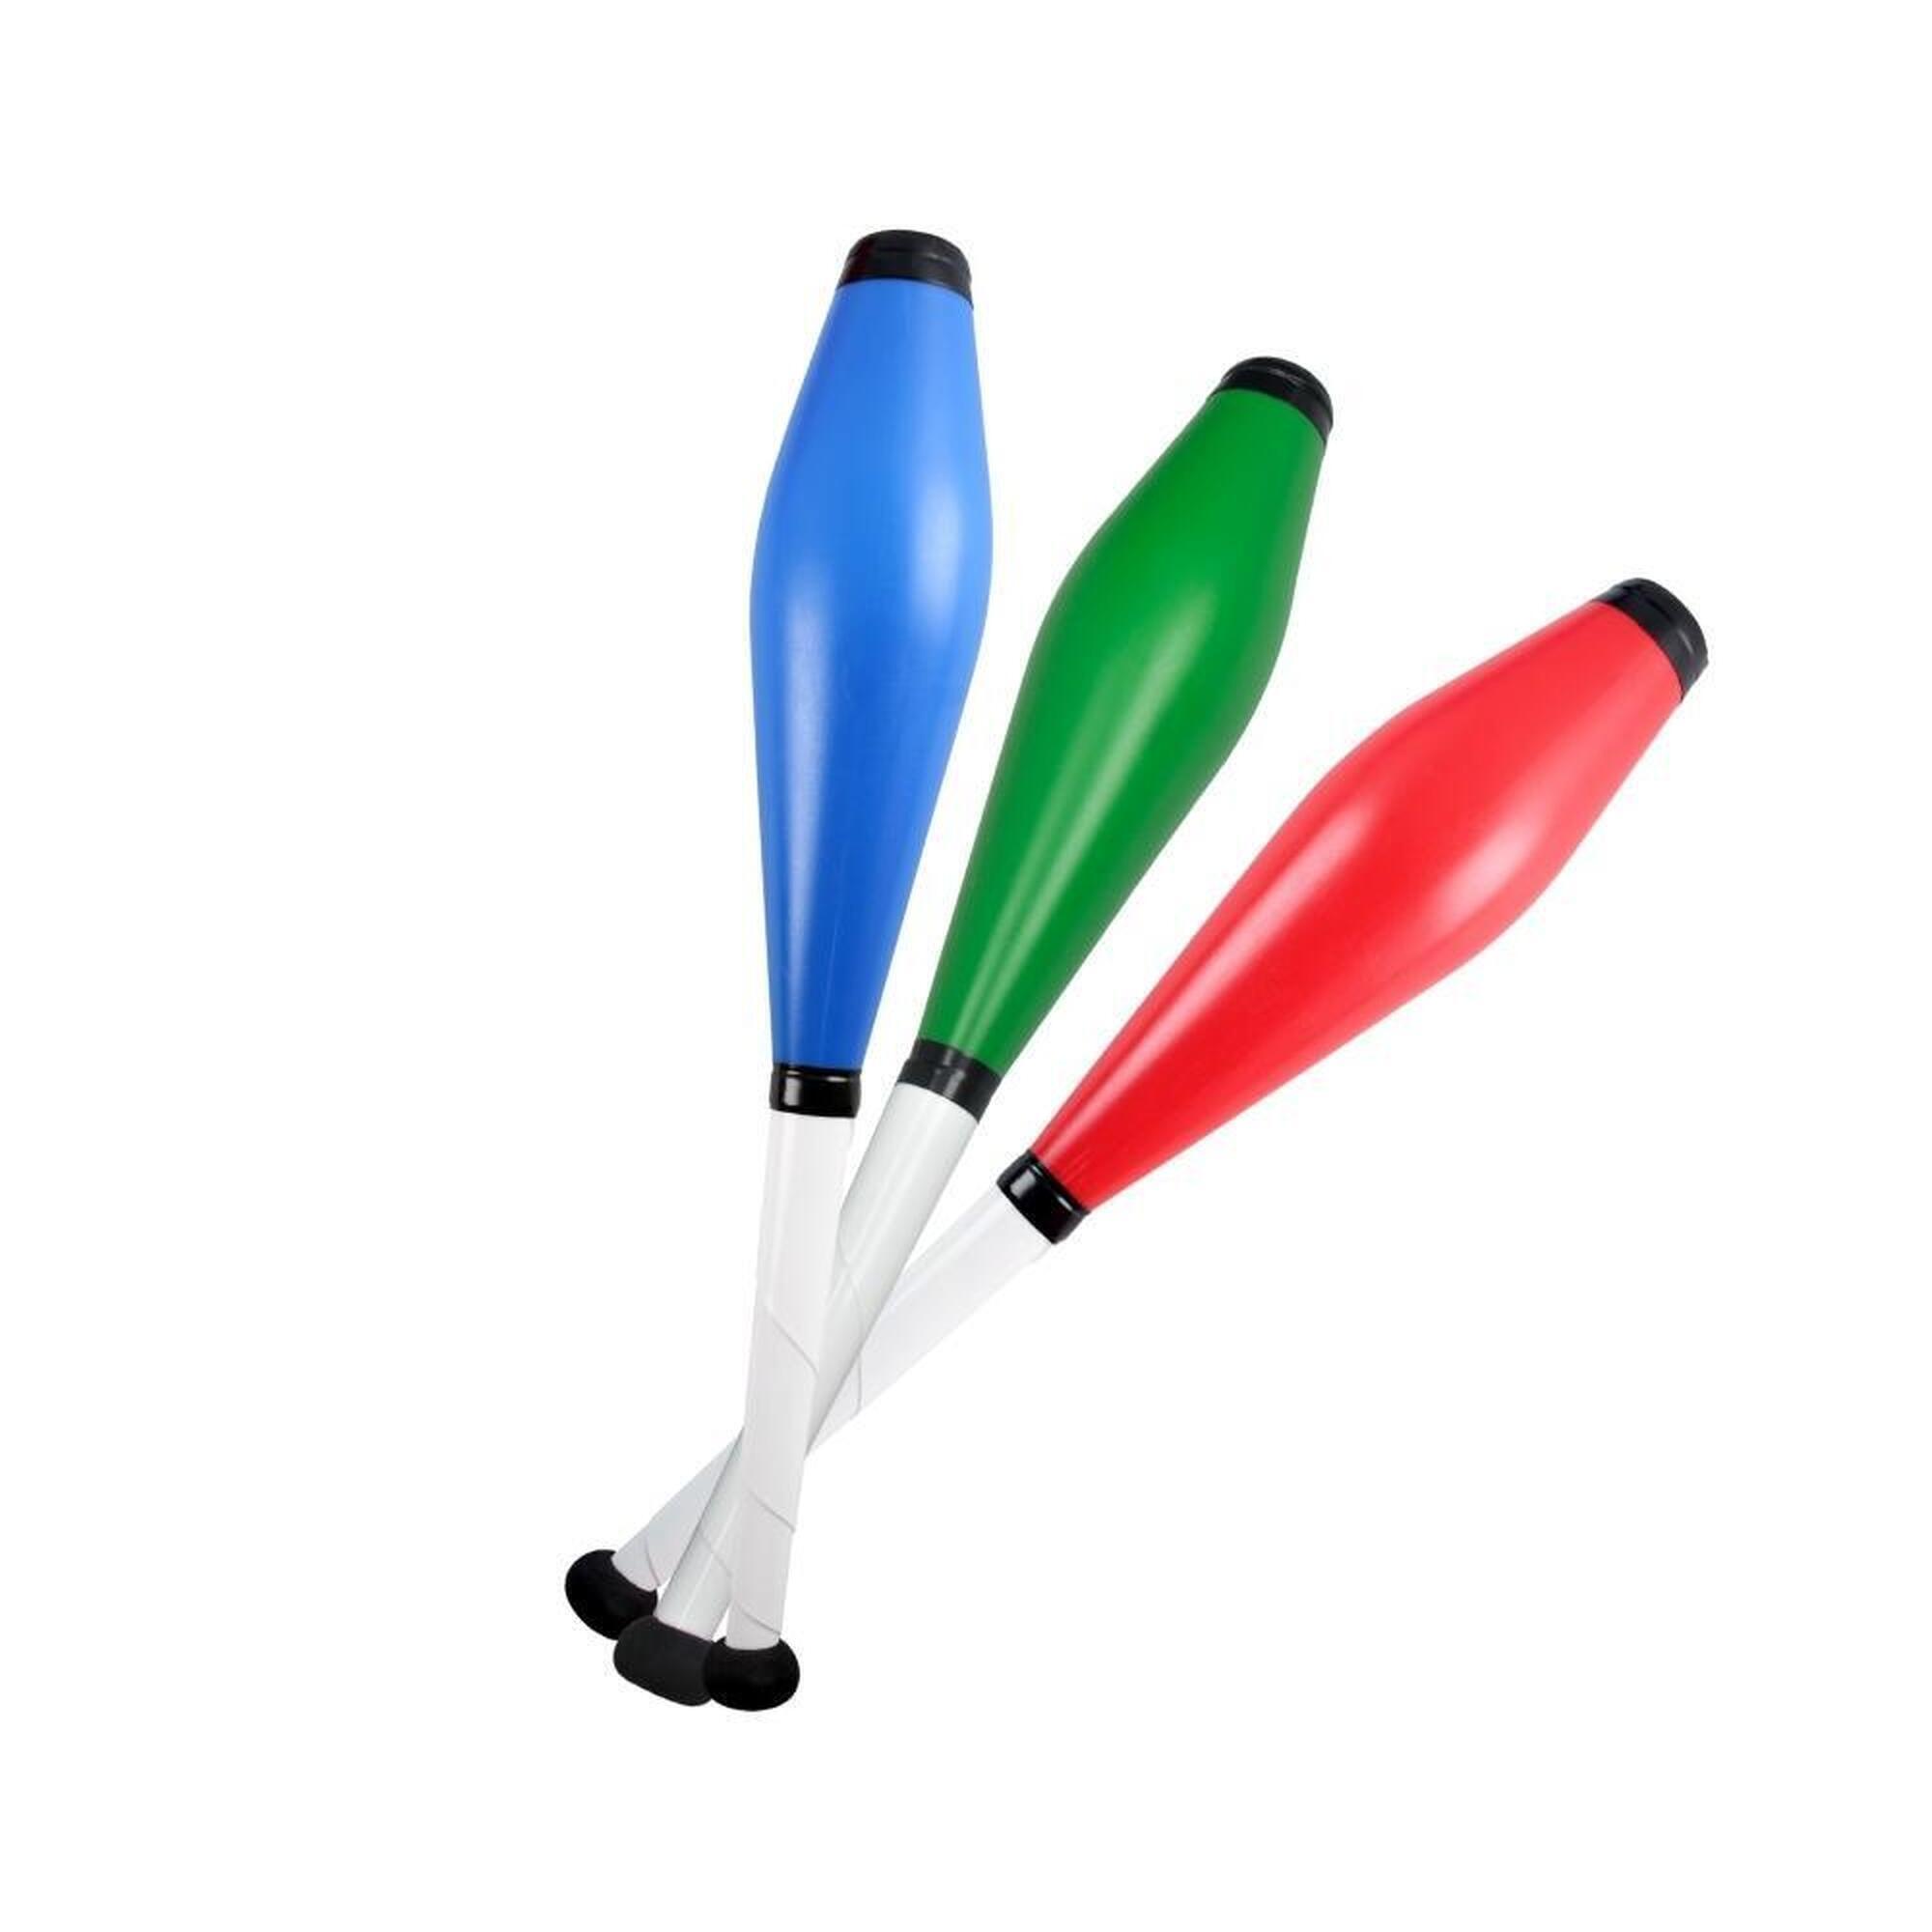 FIRETOYS Set of 3x Trainer Juggling Club - Red, Green, Blue